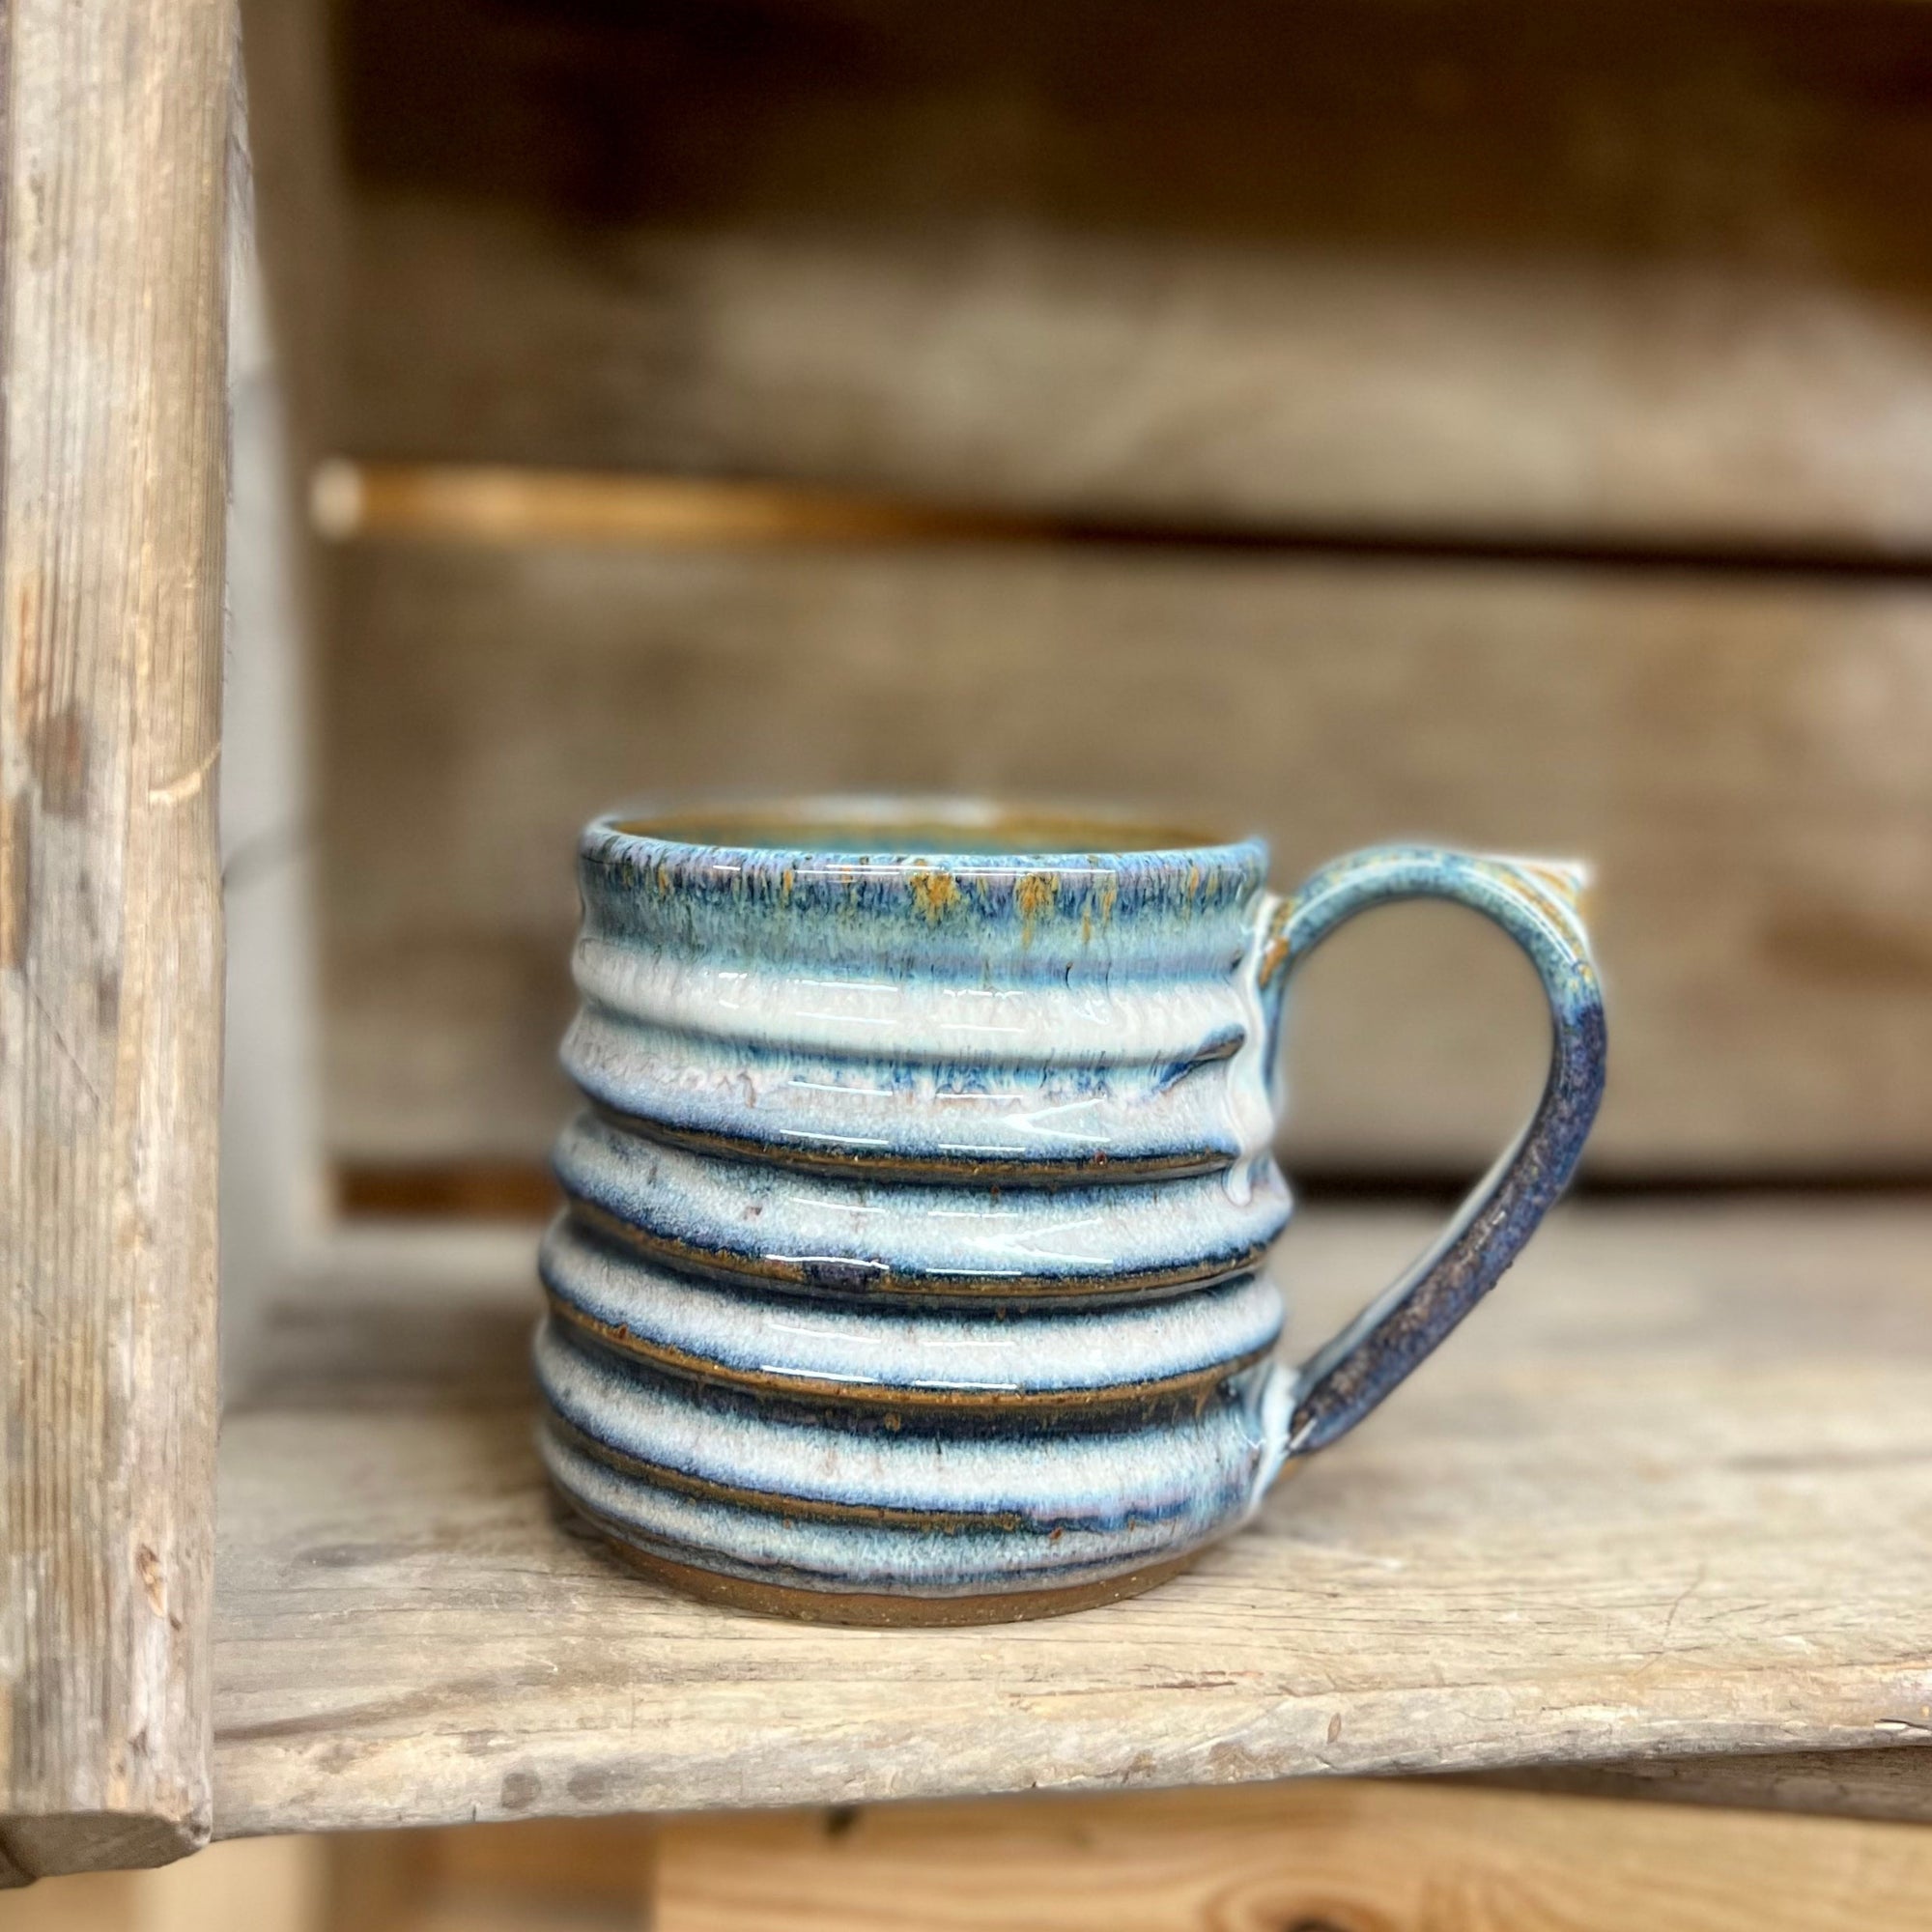 Alewine Pottery - Take 10% off Mama Bear and Papa Bear mugs with the code  mamapapa10 online only at Alewinepottery.net. • • • • #genuinealewine  #maker #artisan #handmade #craftsman #functionalpottery #pottery #clay #